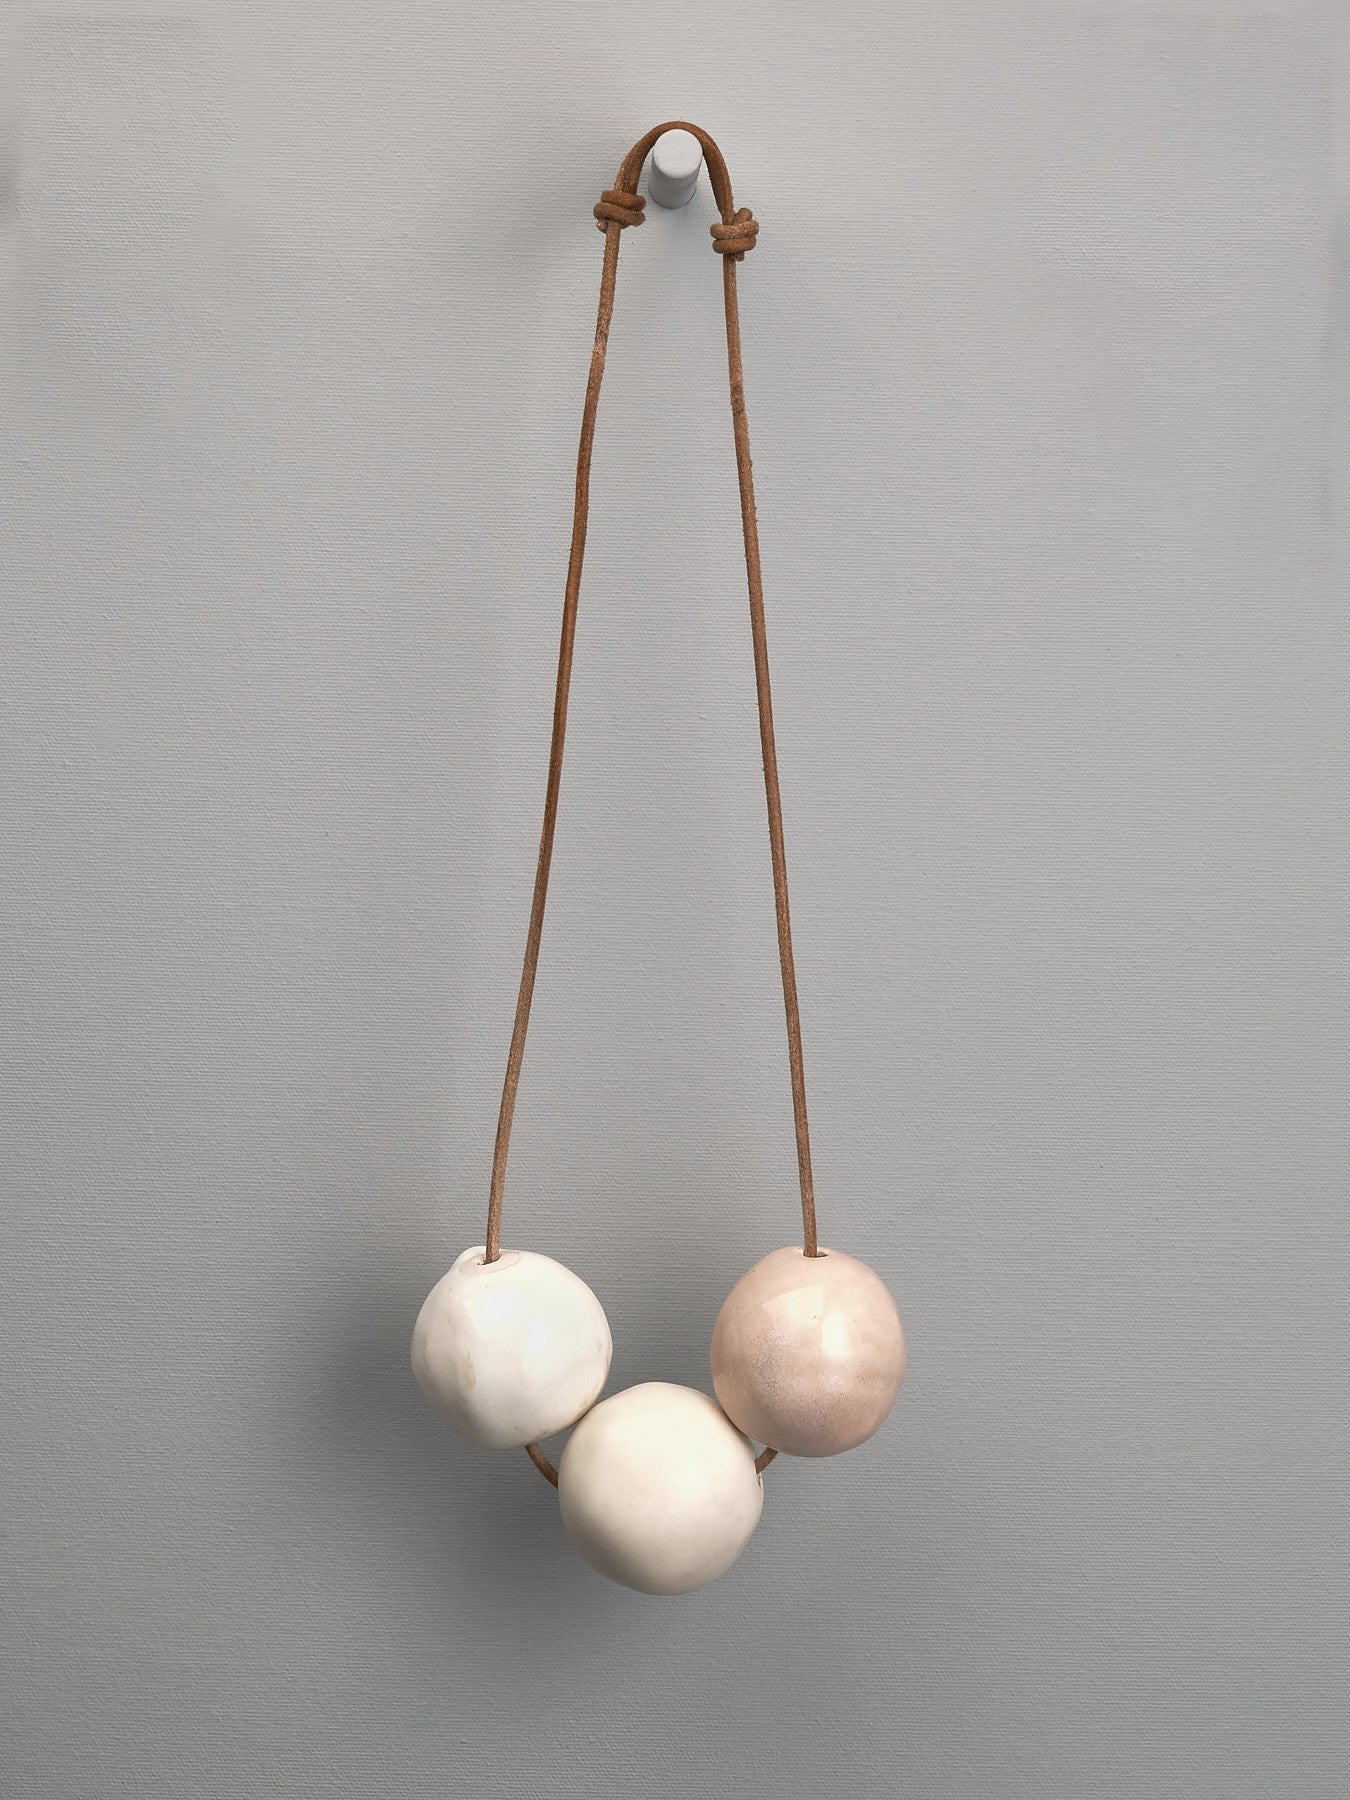 A necklace with three Ceramic Beads – Ø 50𝗆𝗆, from the brand Tamara Rookes, hanging from a rope.